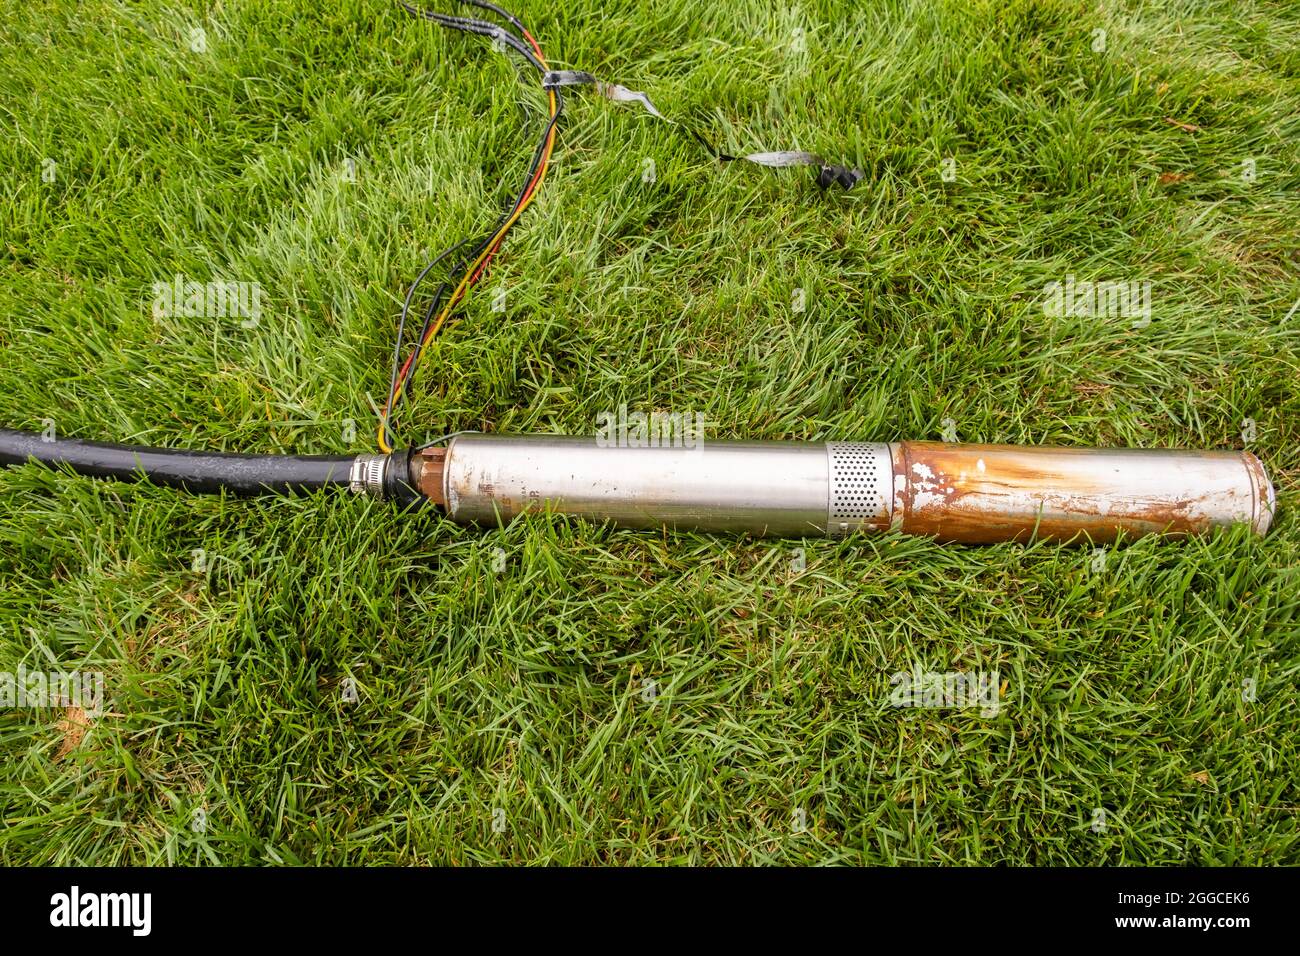 Faulty in ground lawn sprinkler pump lying in tall fescue grass in the process of being changed out for a new one. Stock Photo